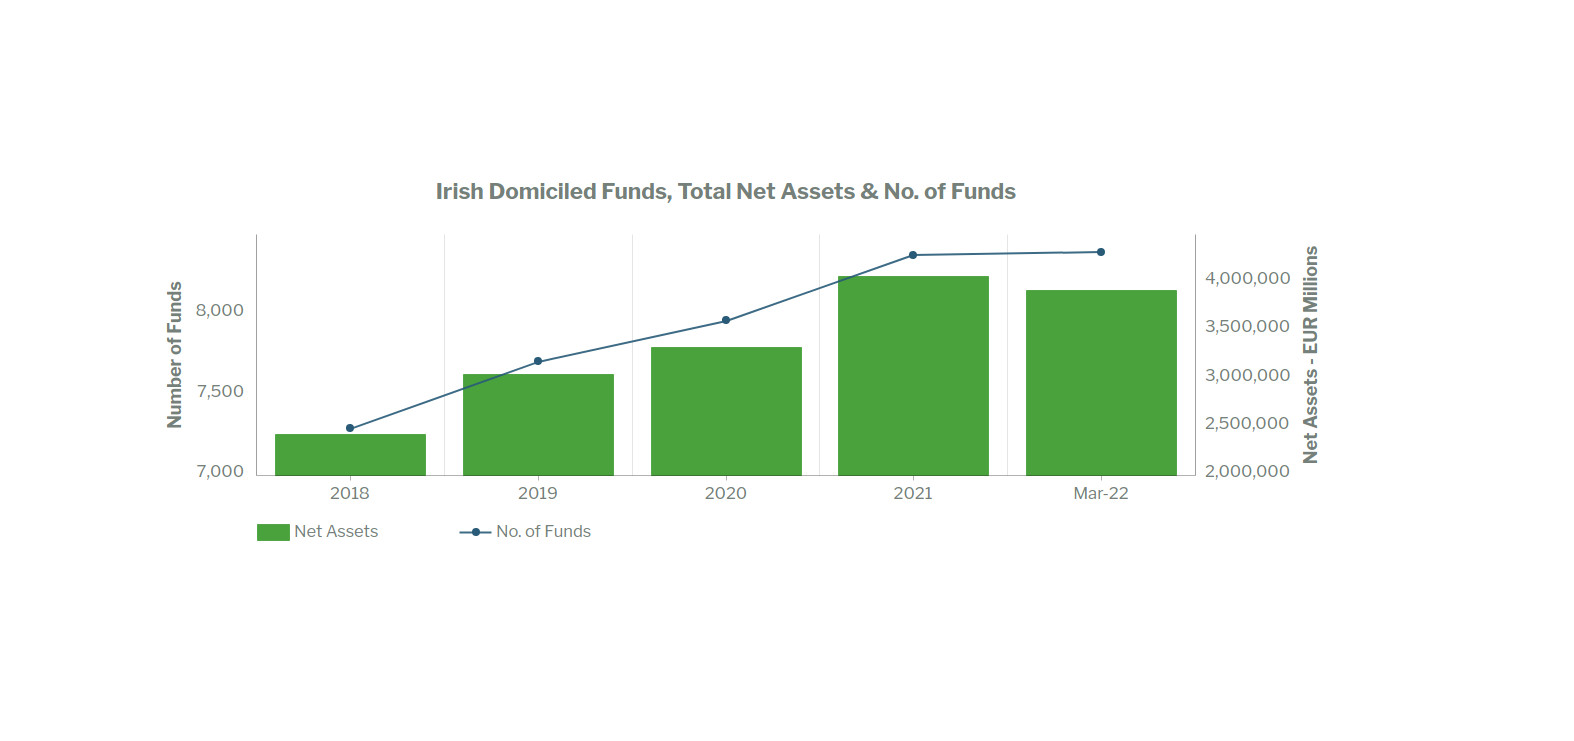 Celtic Tiger? Ireland increasingly becoming the ‚go-to‘ funds jurisdiction globally